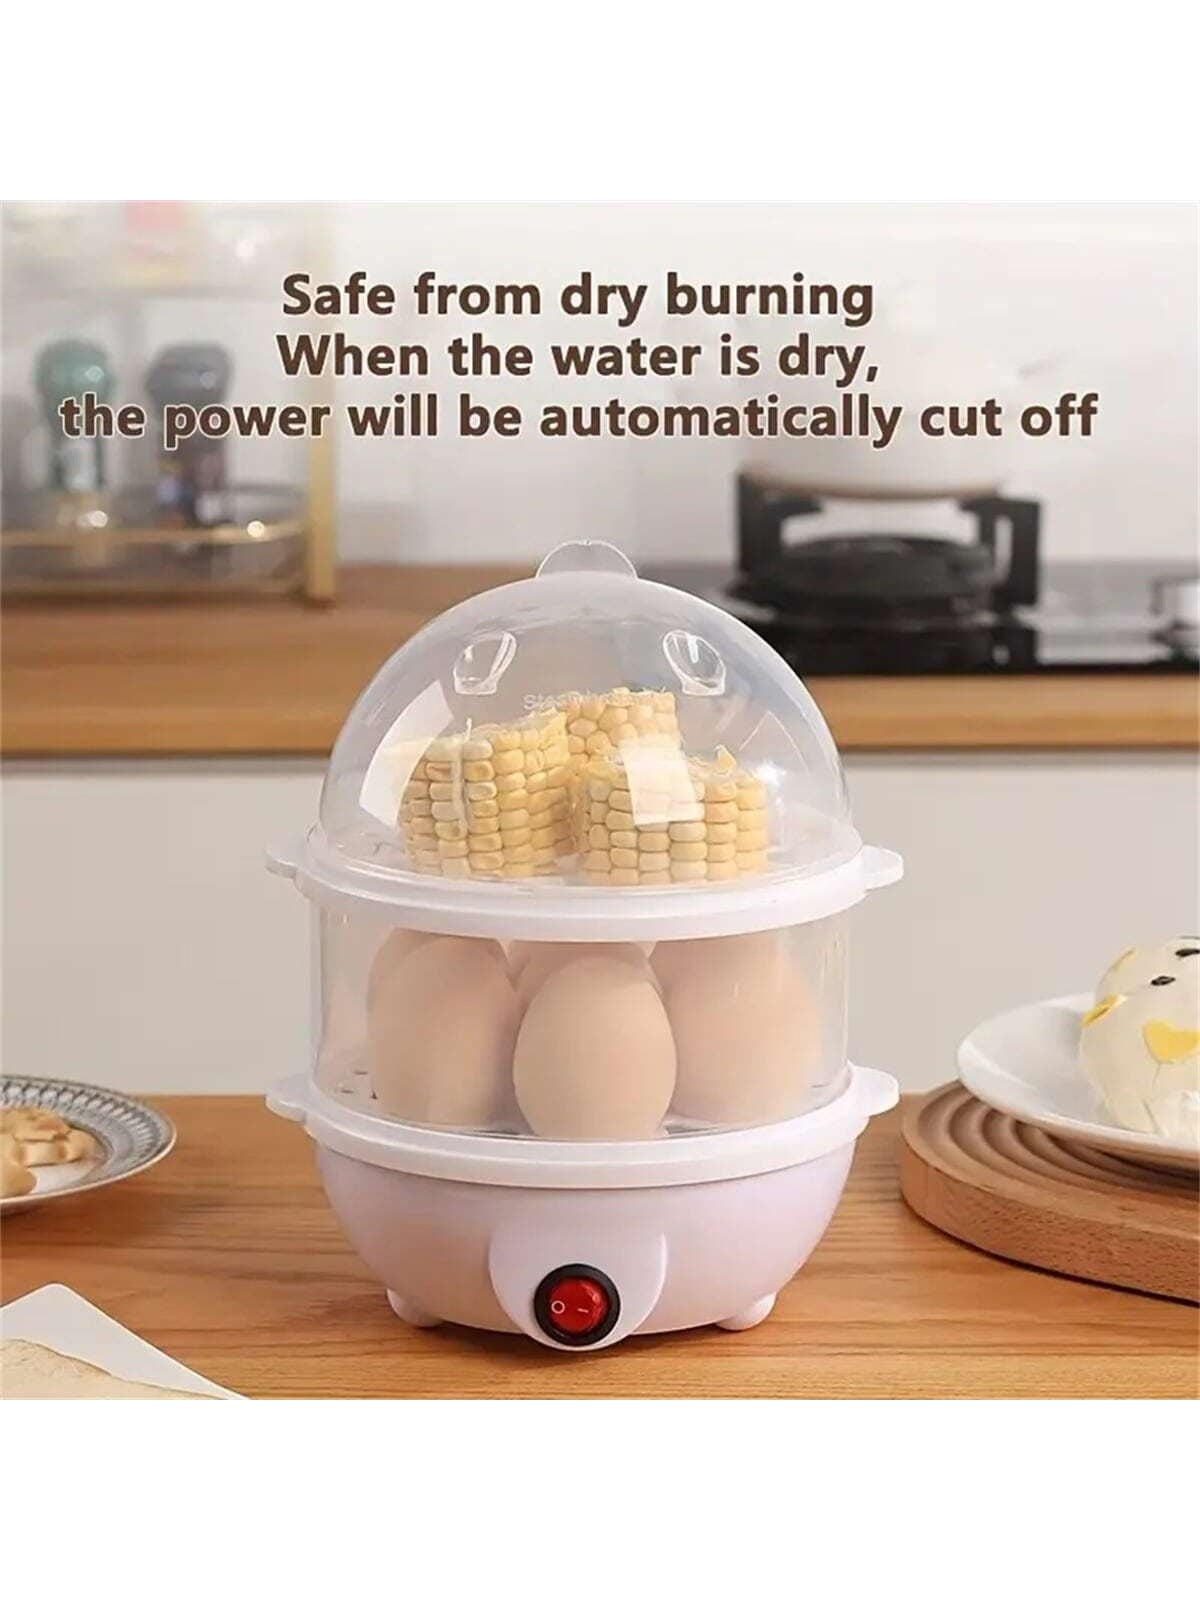 1pc Double-layer Multifunctional Egg Cooker, Stainless Steel Steamer,  Breakfast Machine, For Steam Eggs, Corn And Other Foods, Household Kitchen  Appliance